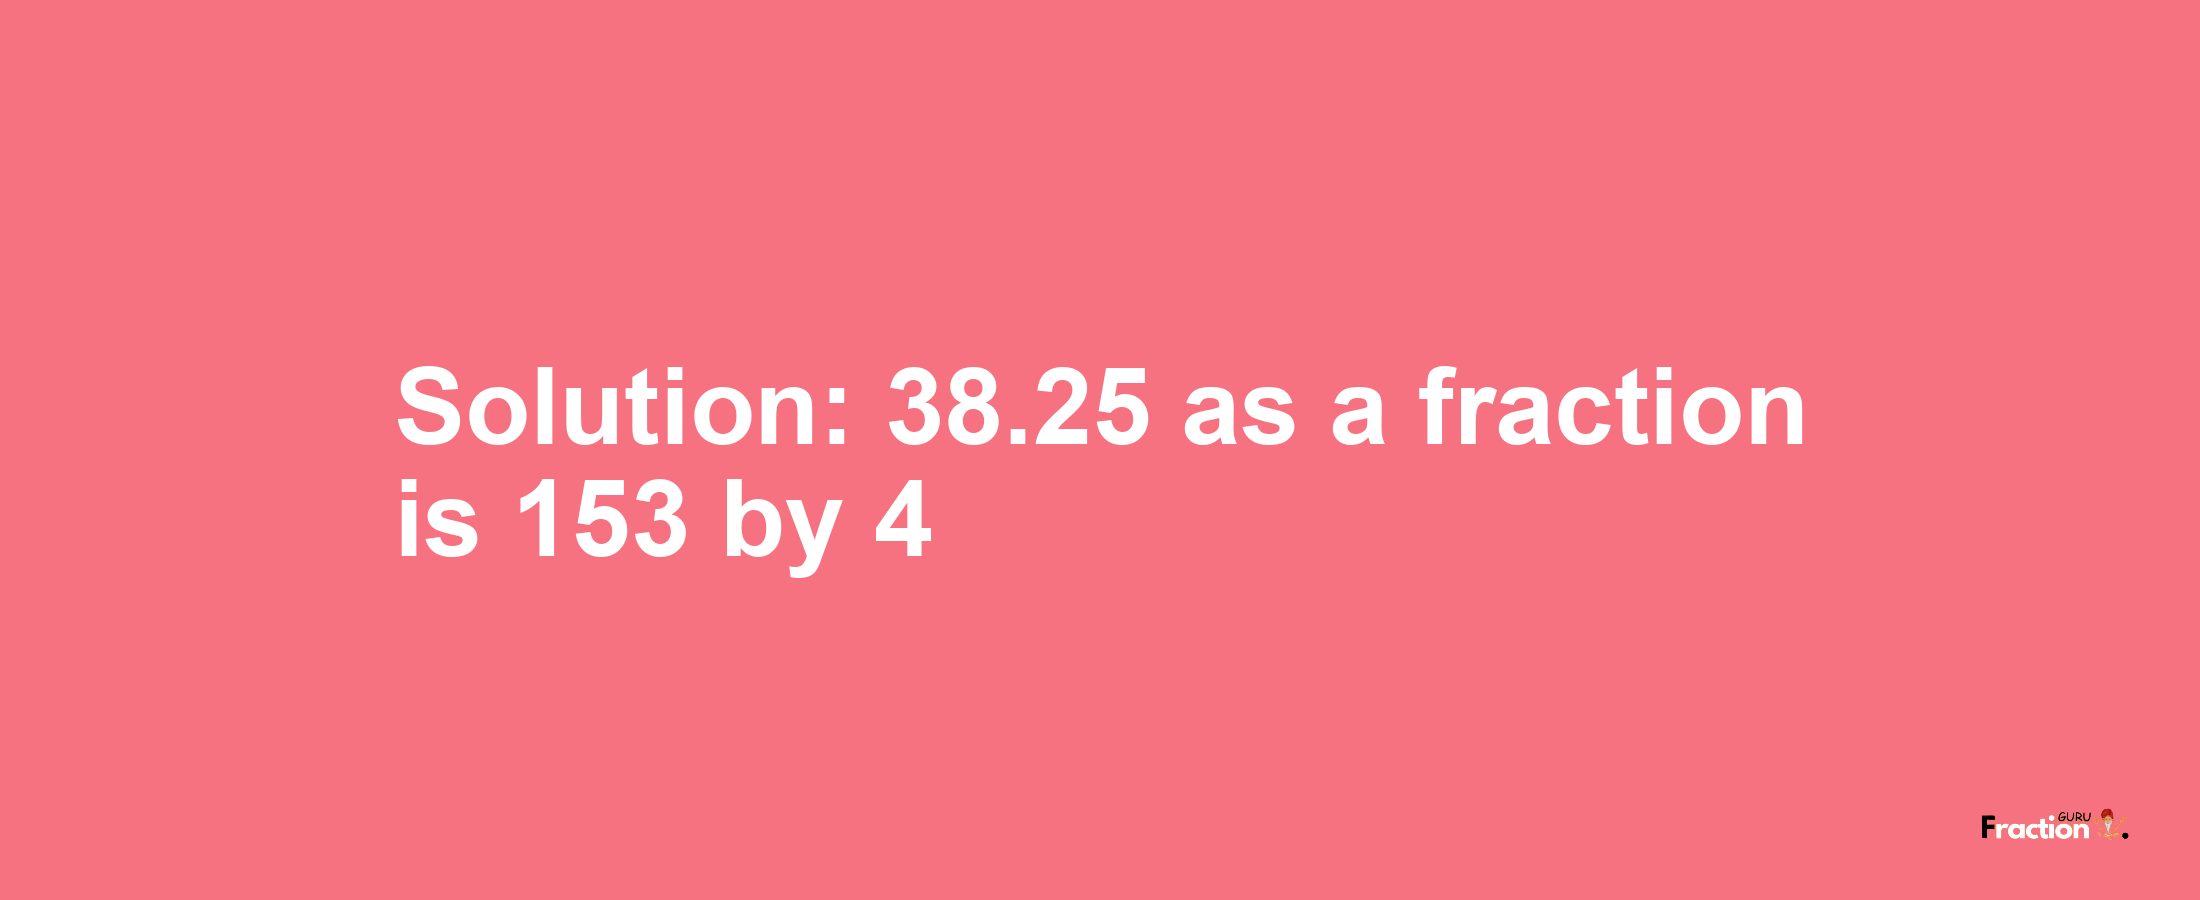 Solution:38.25 as a fraction is 153/4